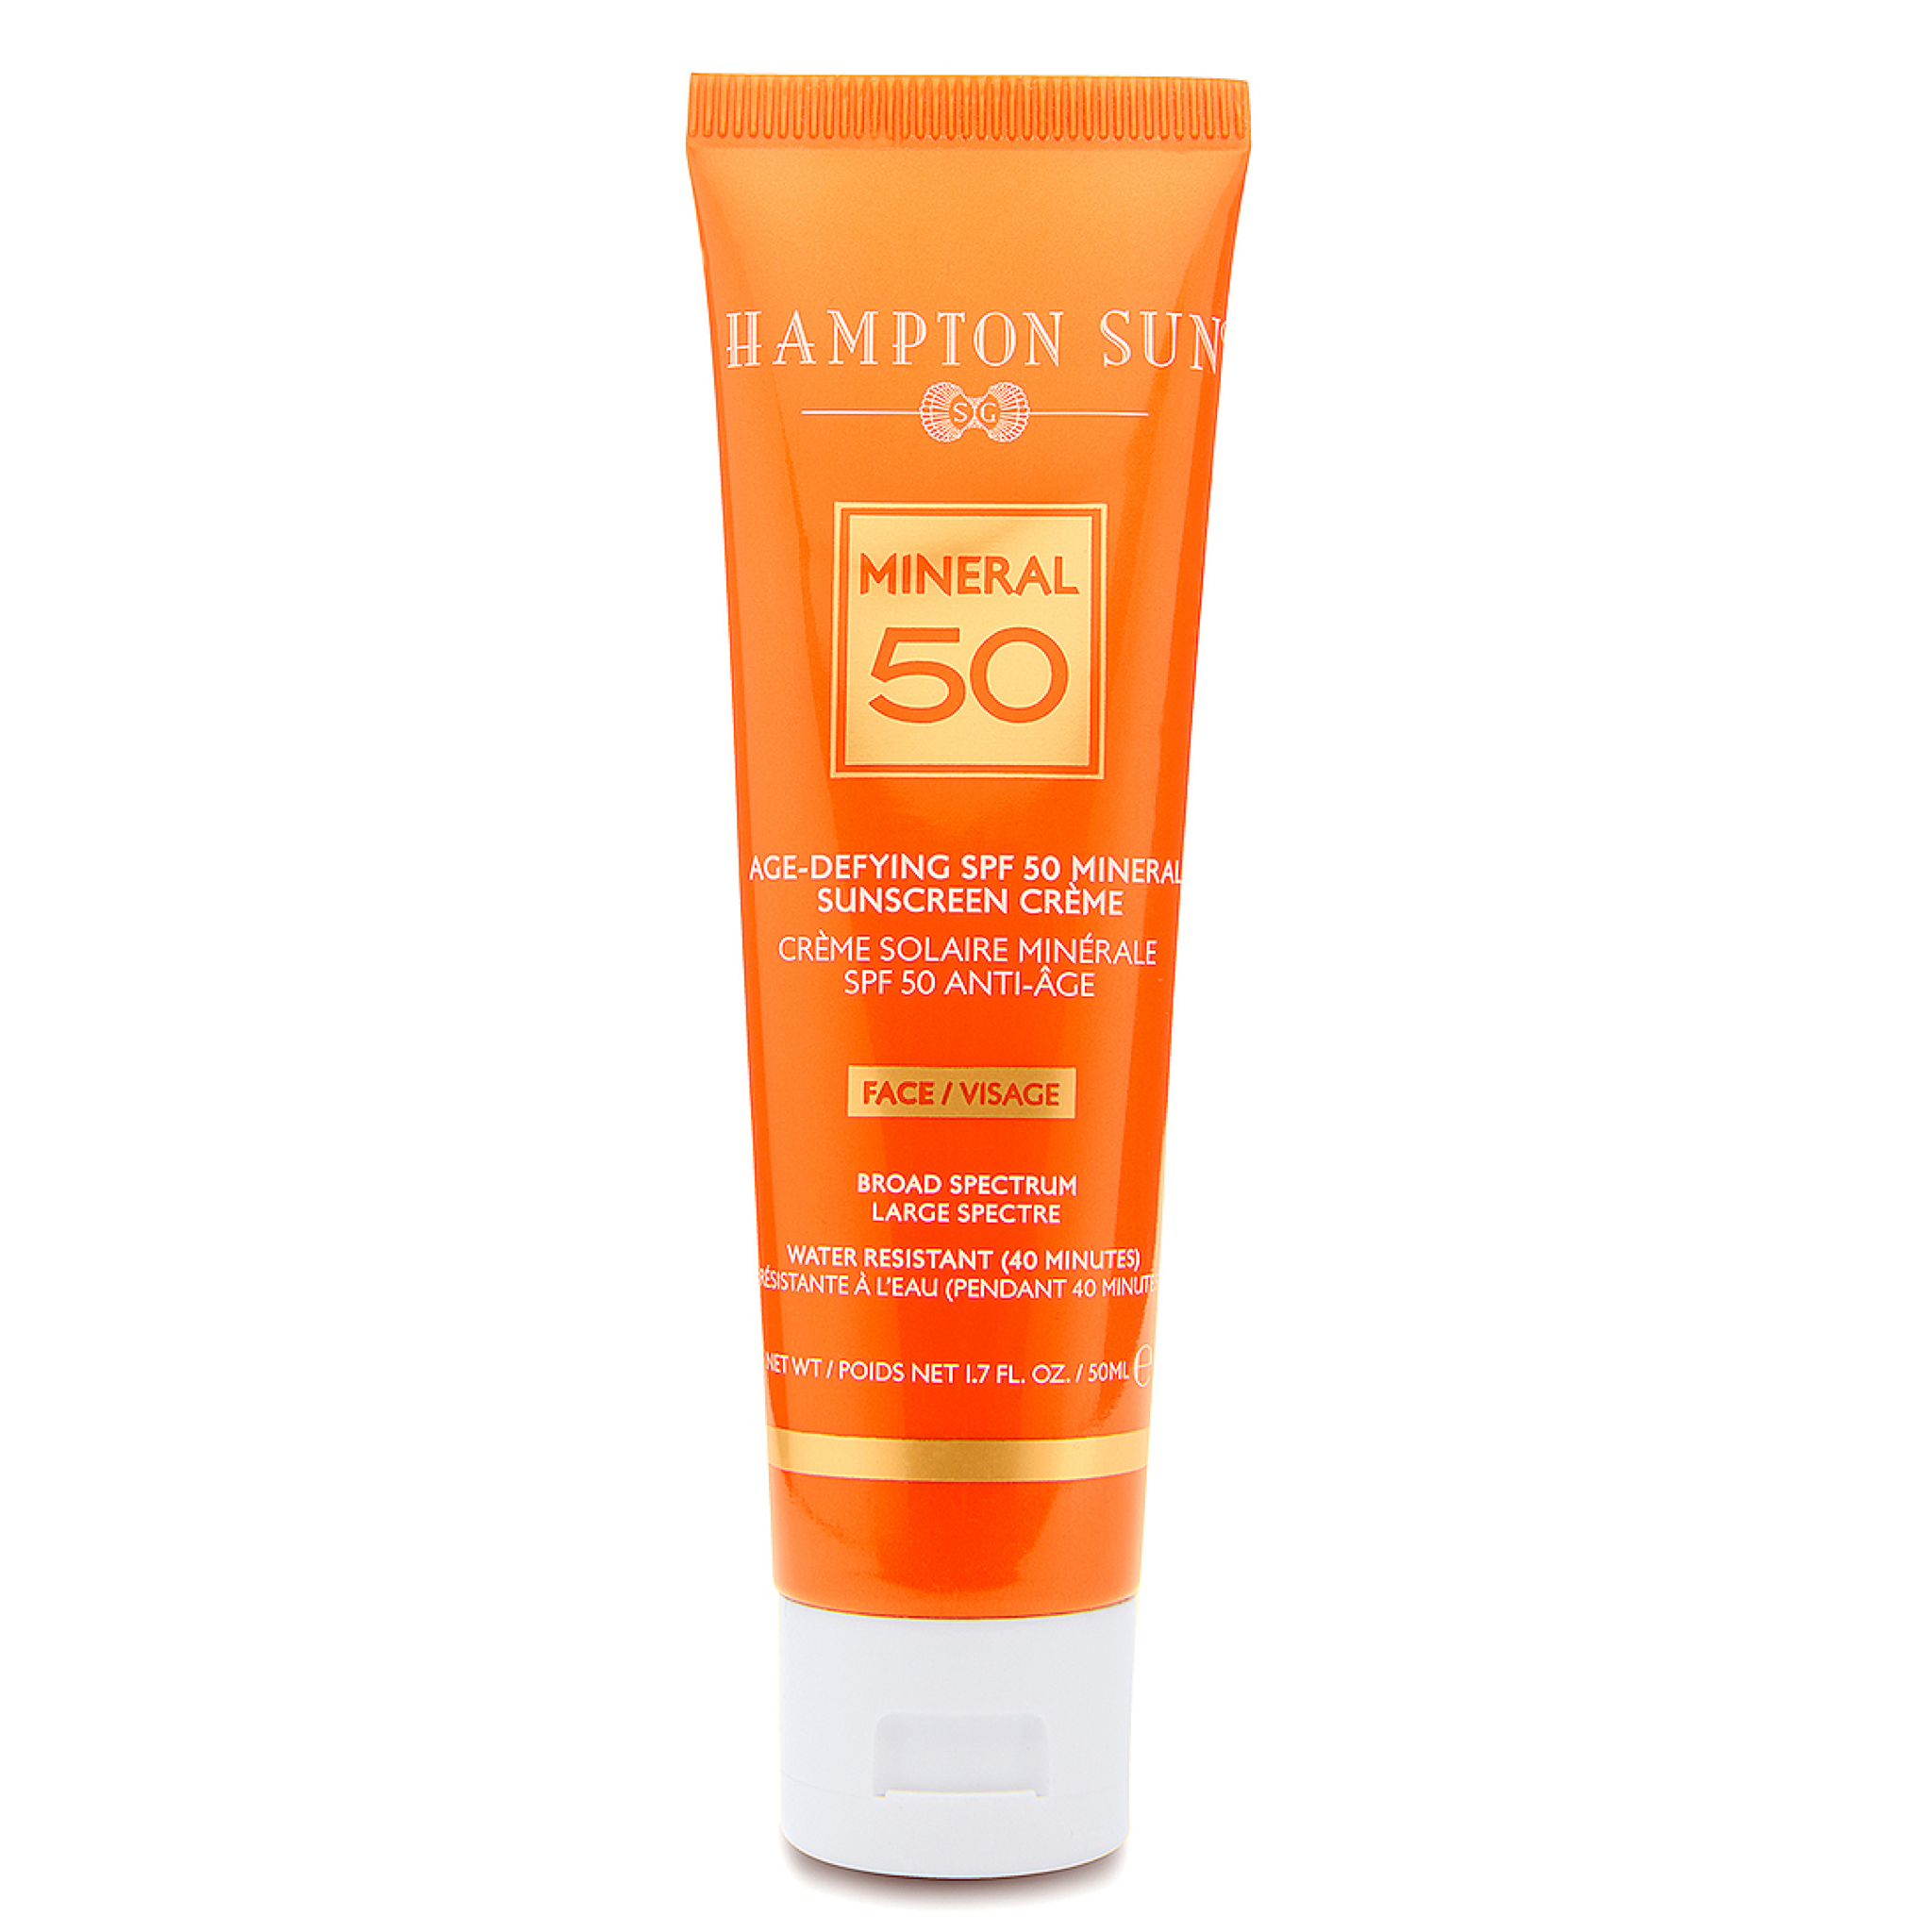 $52 - Age Defying SPF 50 Mineral Creme  (Copy)